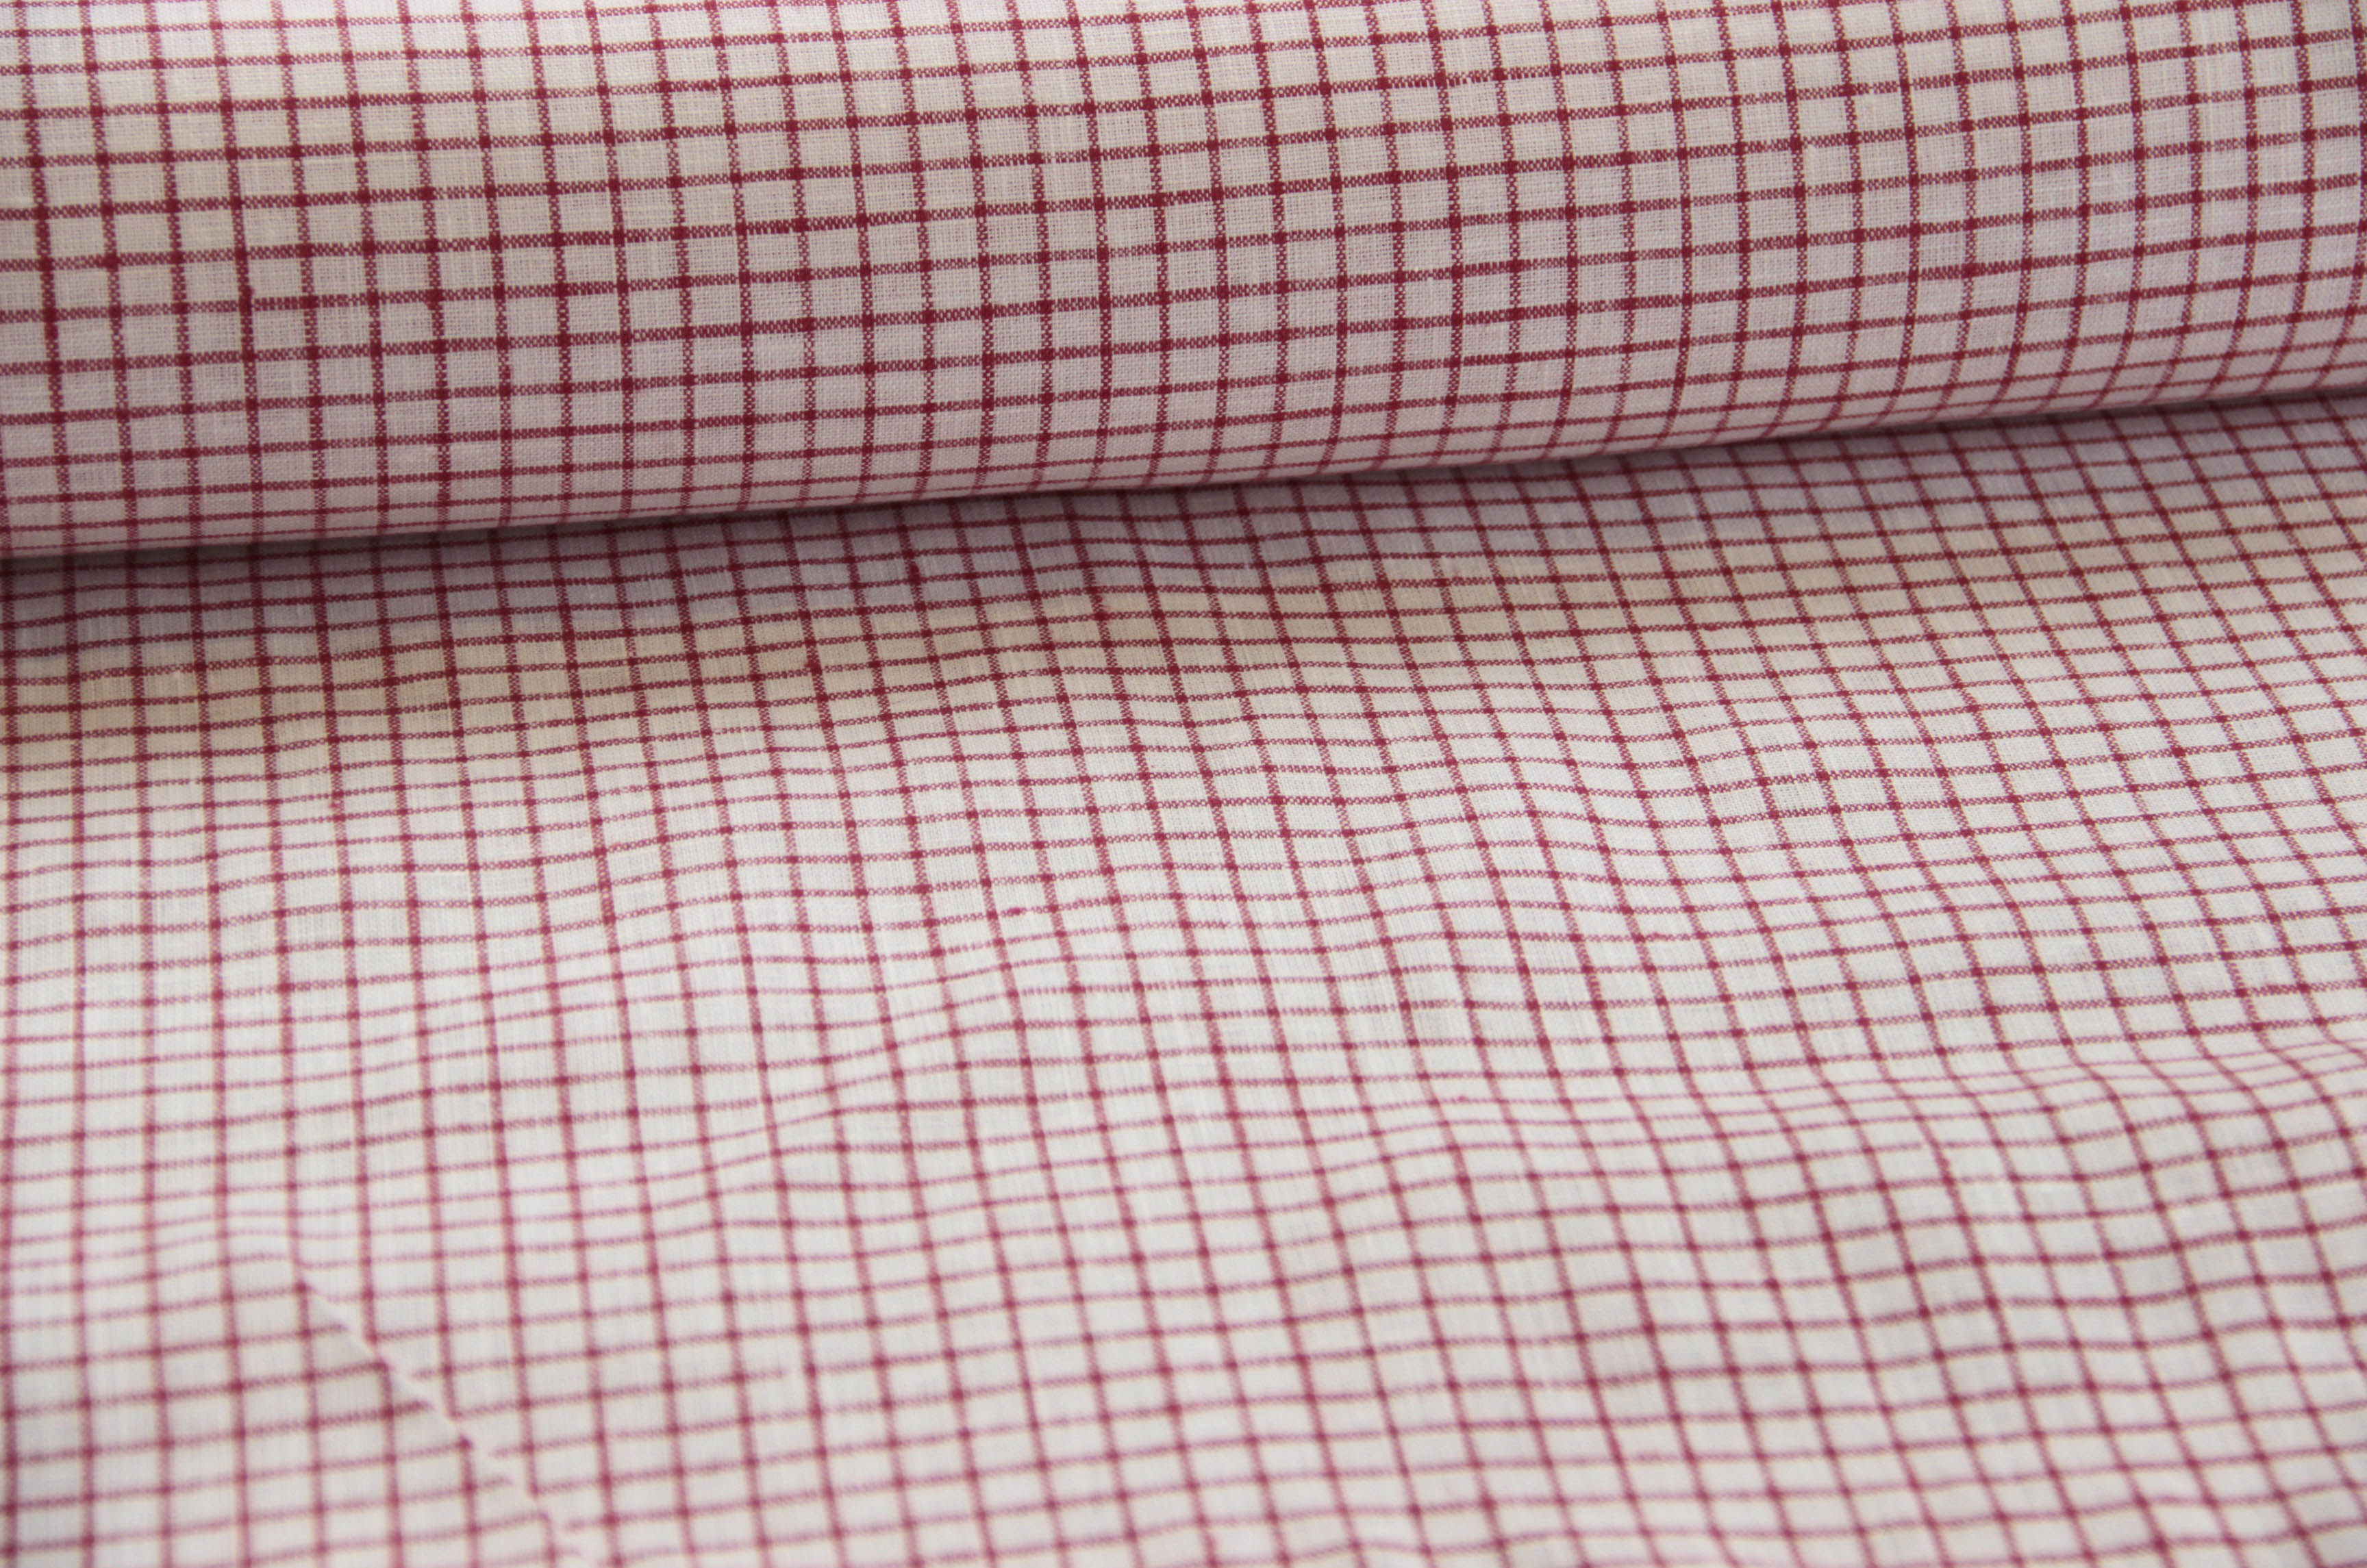 Buy fine-check Linen red/white * From 50 cm